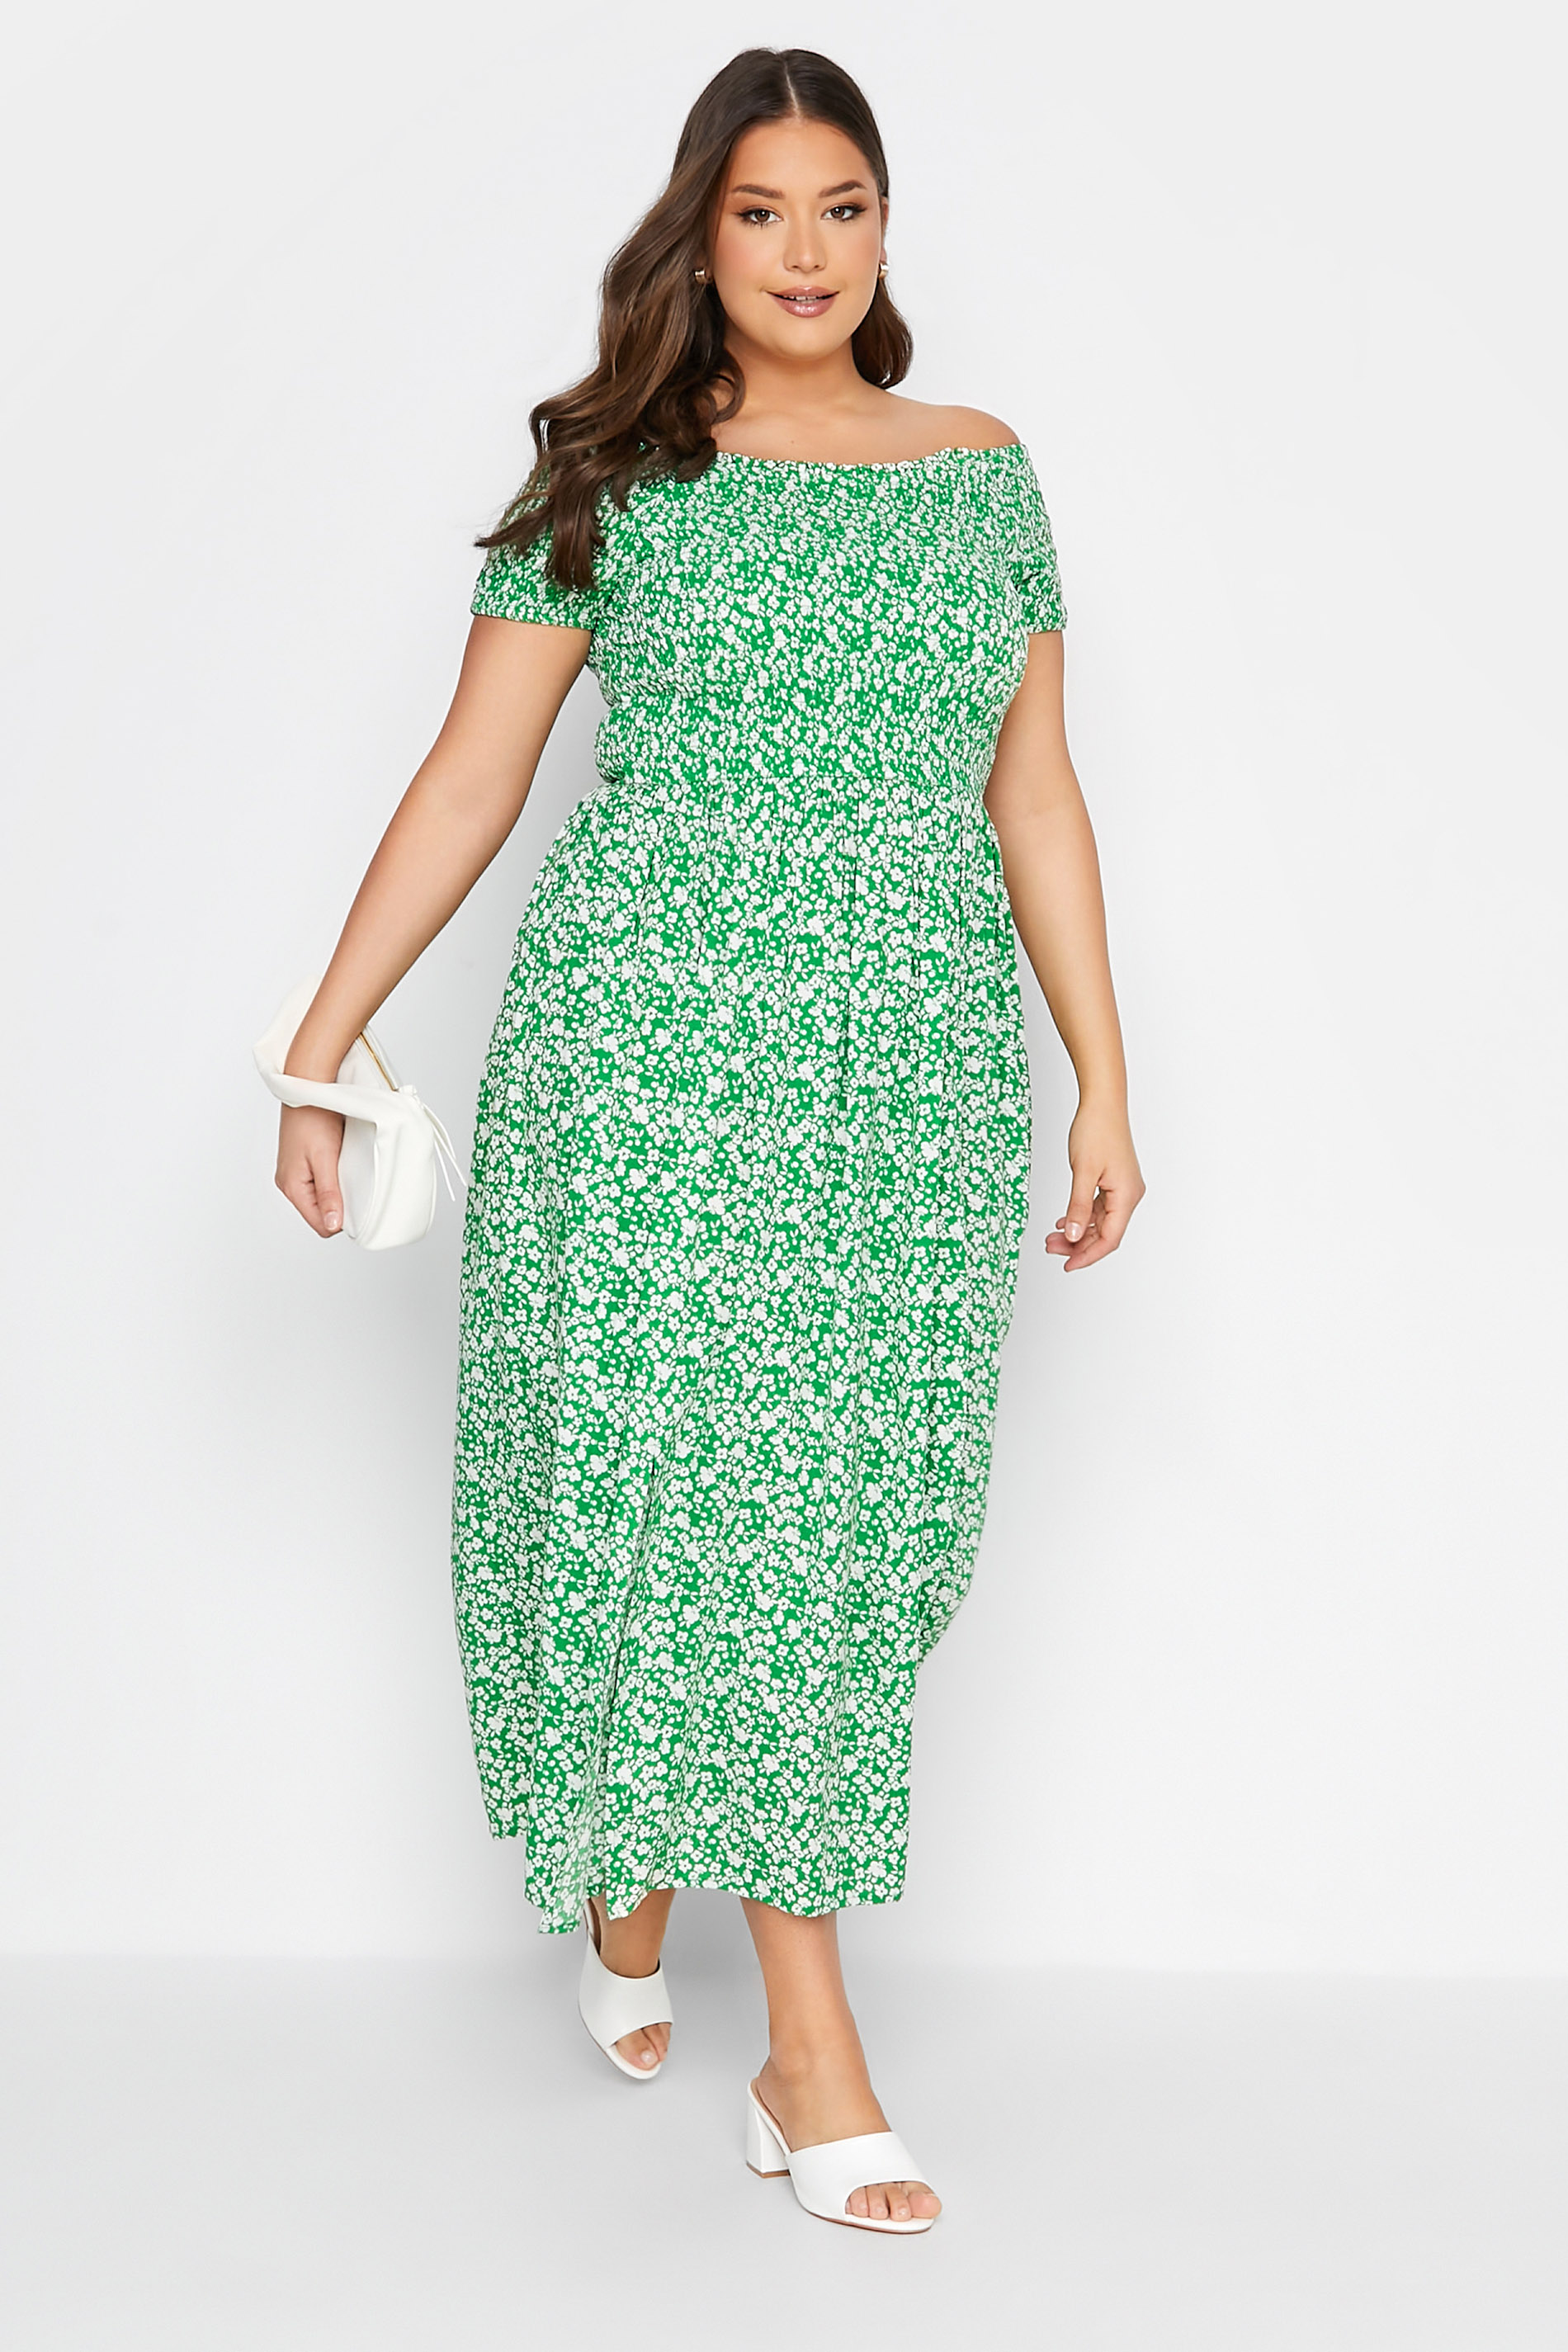 Robes Grande Taille Grande taille  Robes Longues | Robe Floral Maxi Verte Encolure Bardot - NK56901